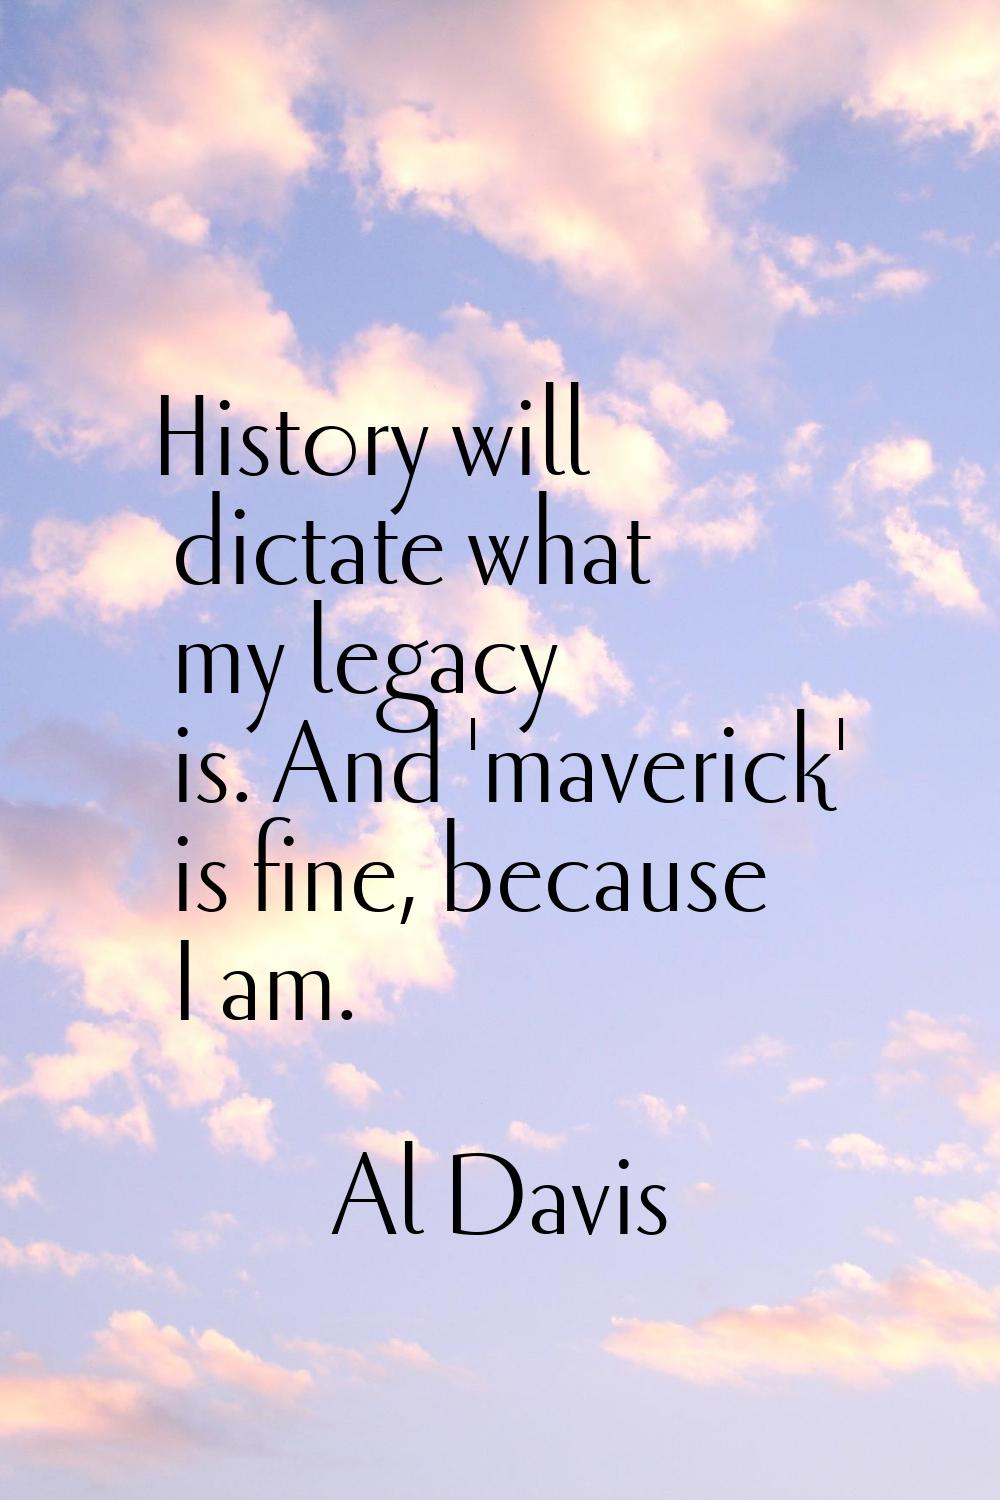 History will dictate what my legacy is. And 'maverick' is fine, because I am.